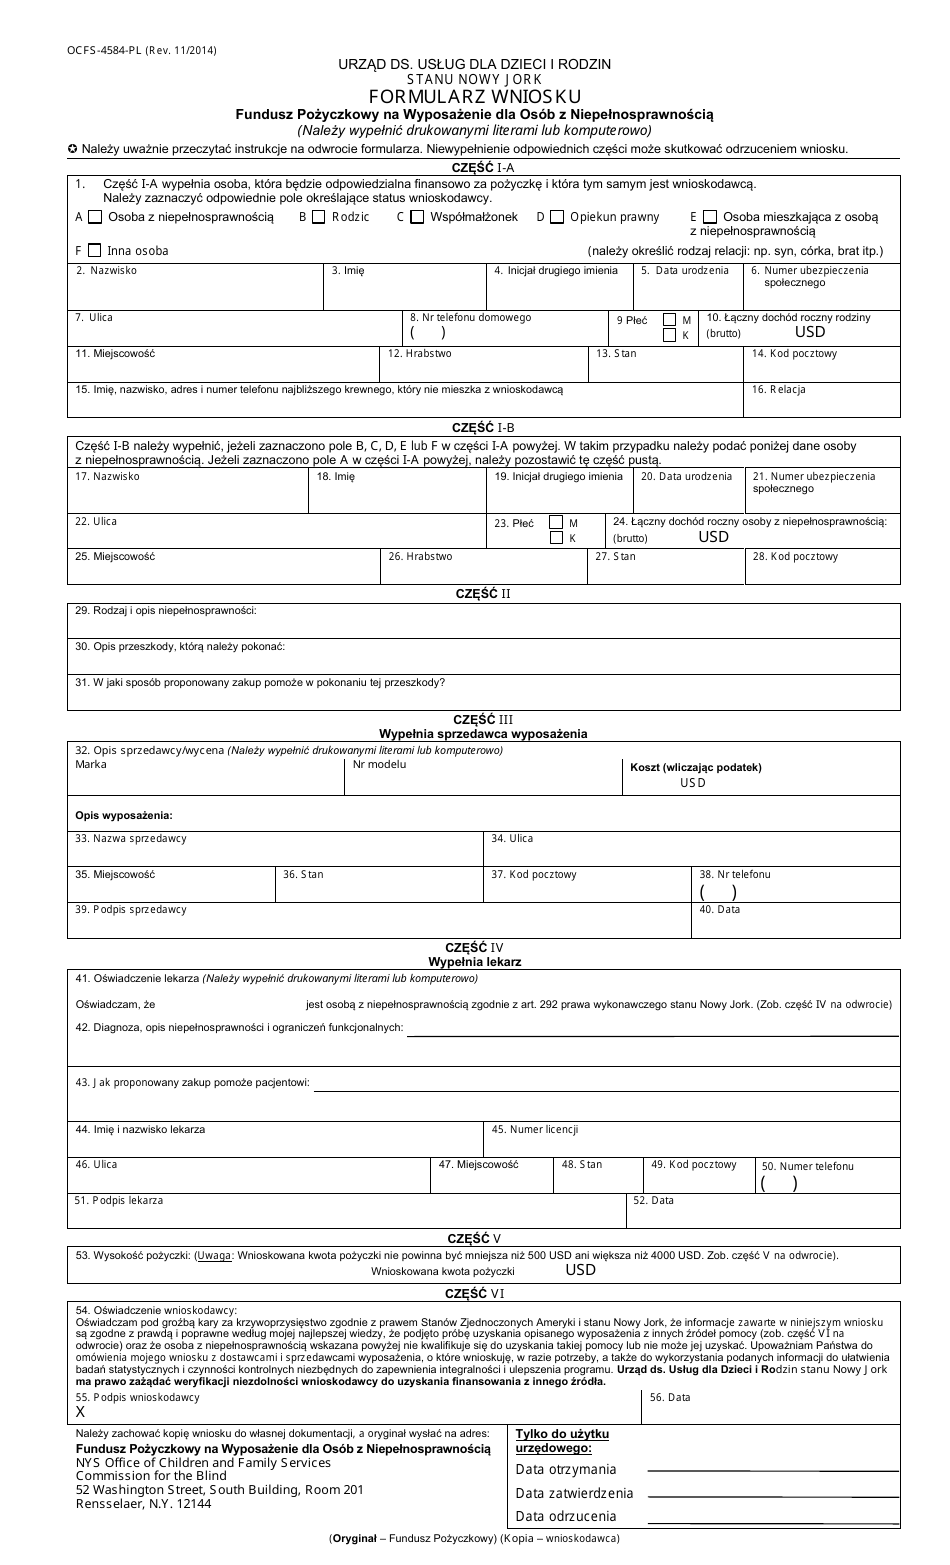 Form OCFS-4584-PL Application Form - Equipment Loan Fund for the Disabled - New York (Polish), Page 1